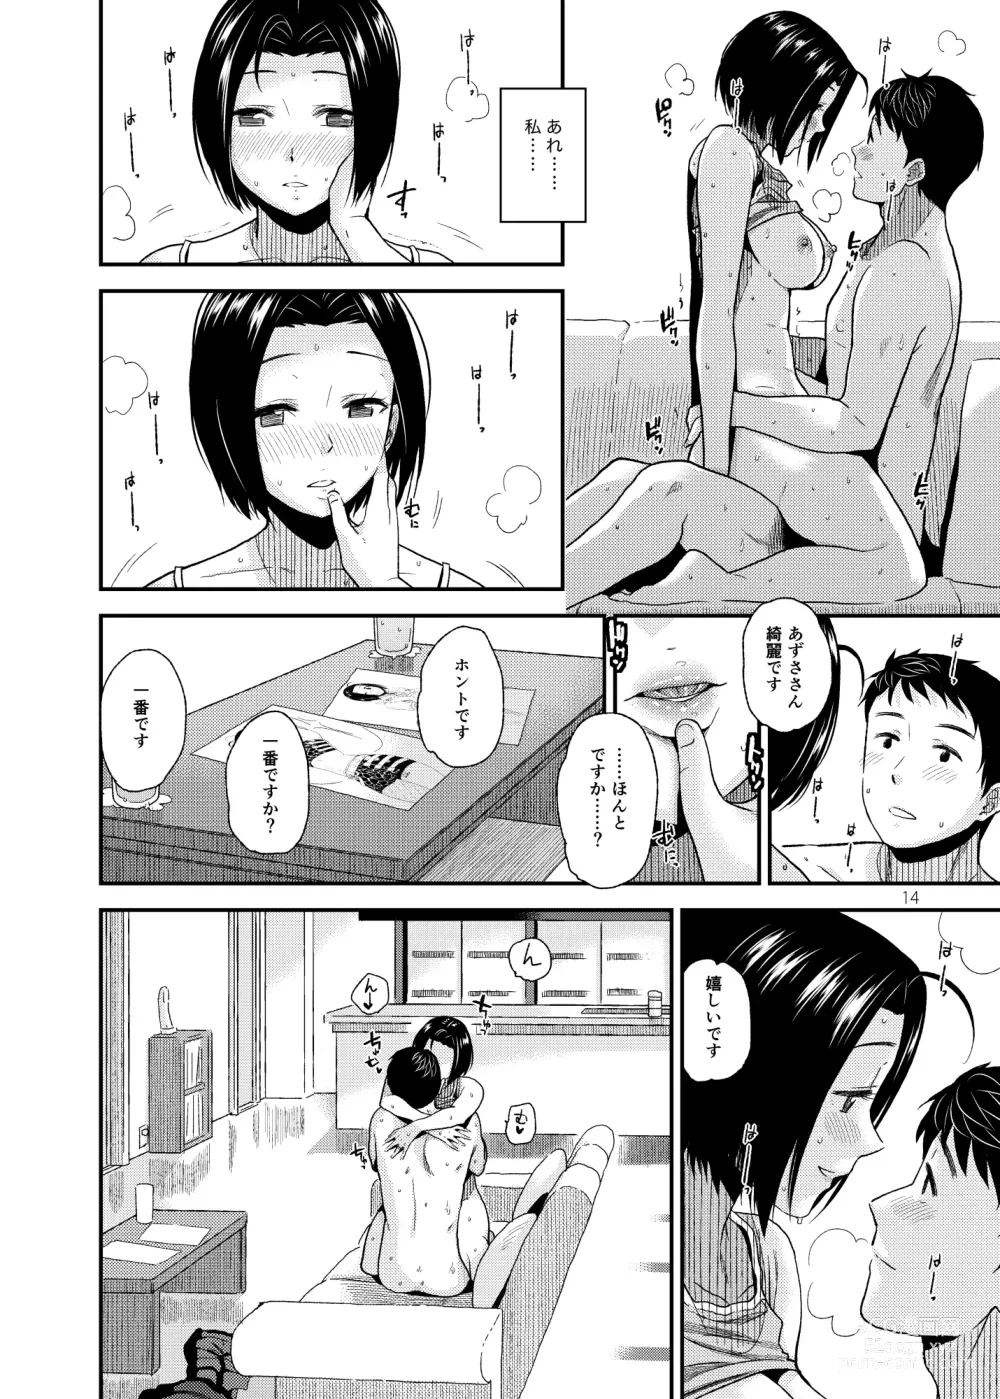 Page 15 of doujinshi Tender Time 2